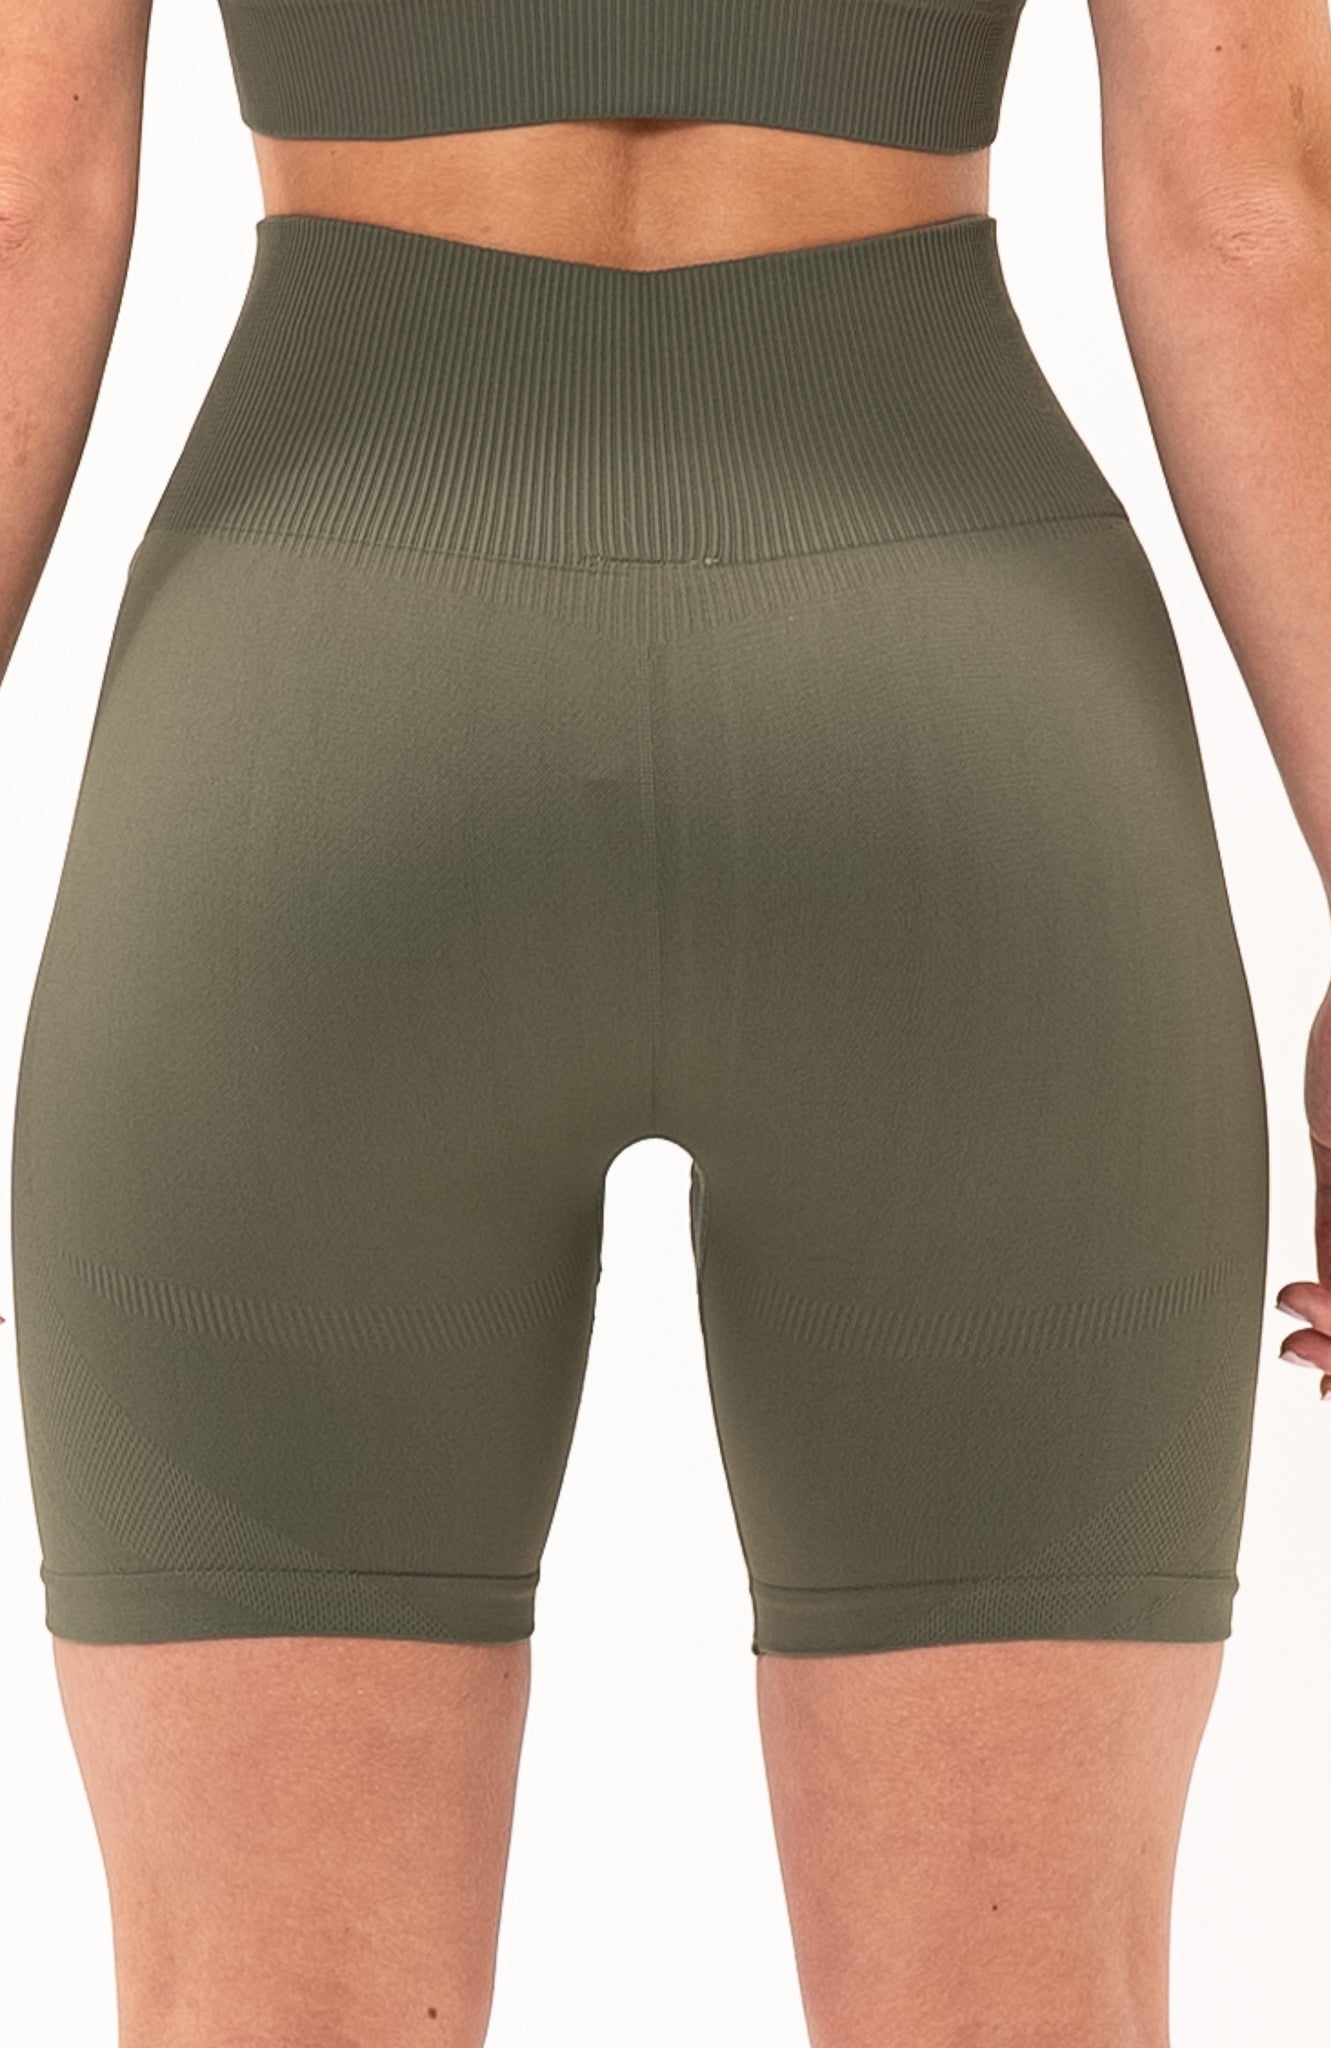 redbaysand Women's seamless Limitless high waisted cycle shorts in olive fade green – Squat proof 5 inch inseam leg bum enhancing shorts for Gym workouts training, Running, yoga, bodybuilding and bikini fitness.